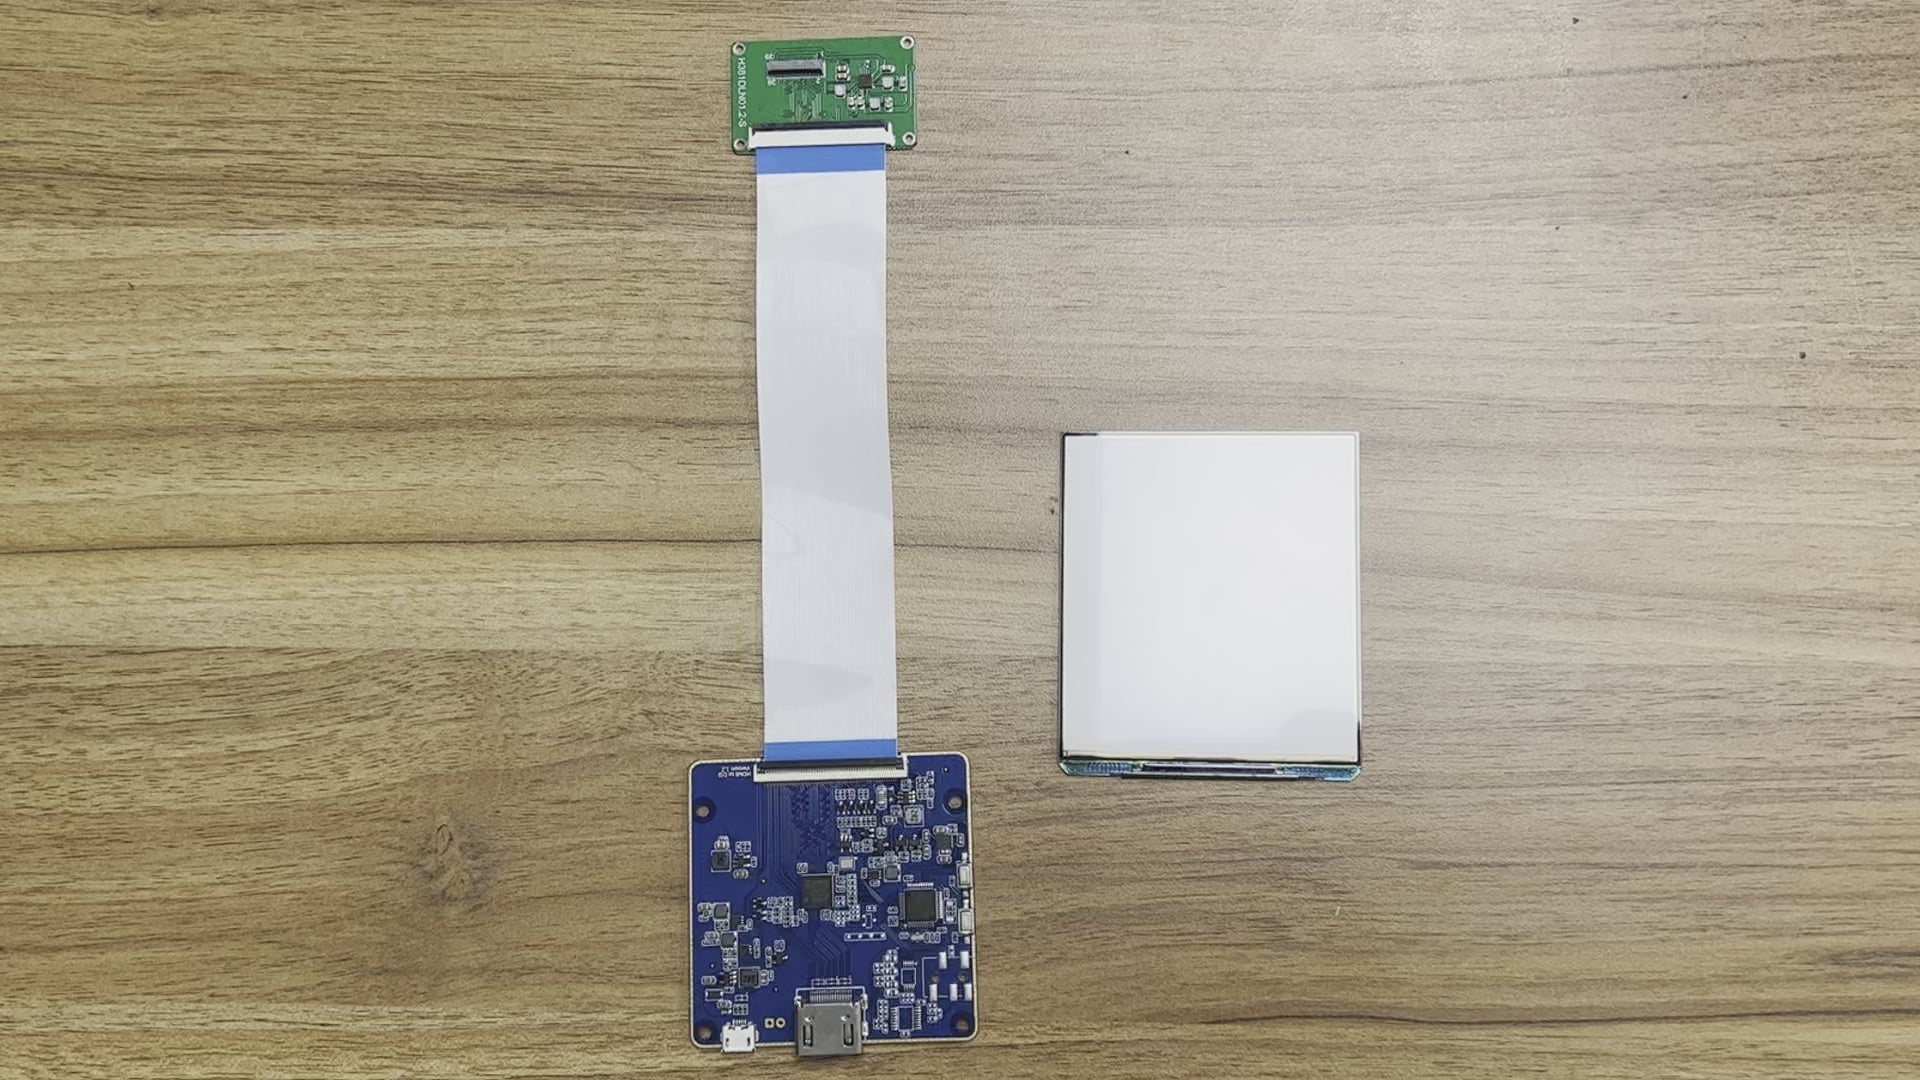 Video connecting 3.8-inch amoled screen and adapter